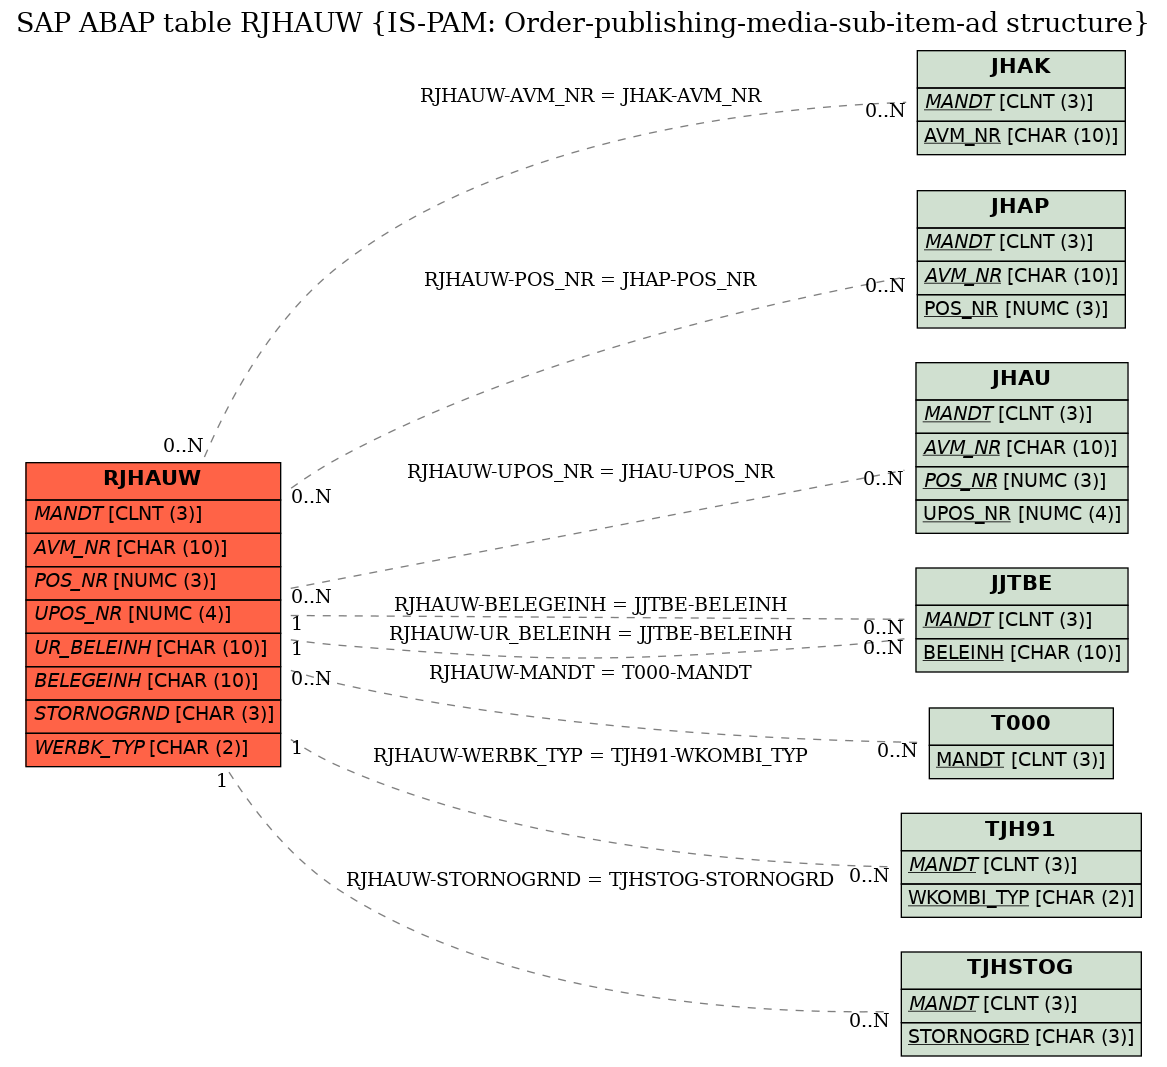 E-R Diagram for table RJHAUW (IS-PAM: Order-publishing-media-sub-item-ad structure)